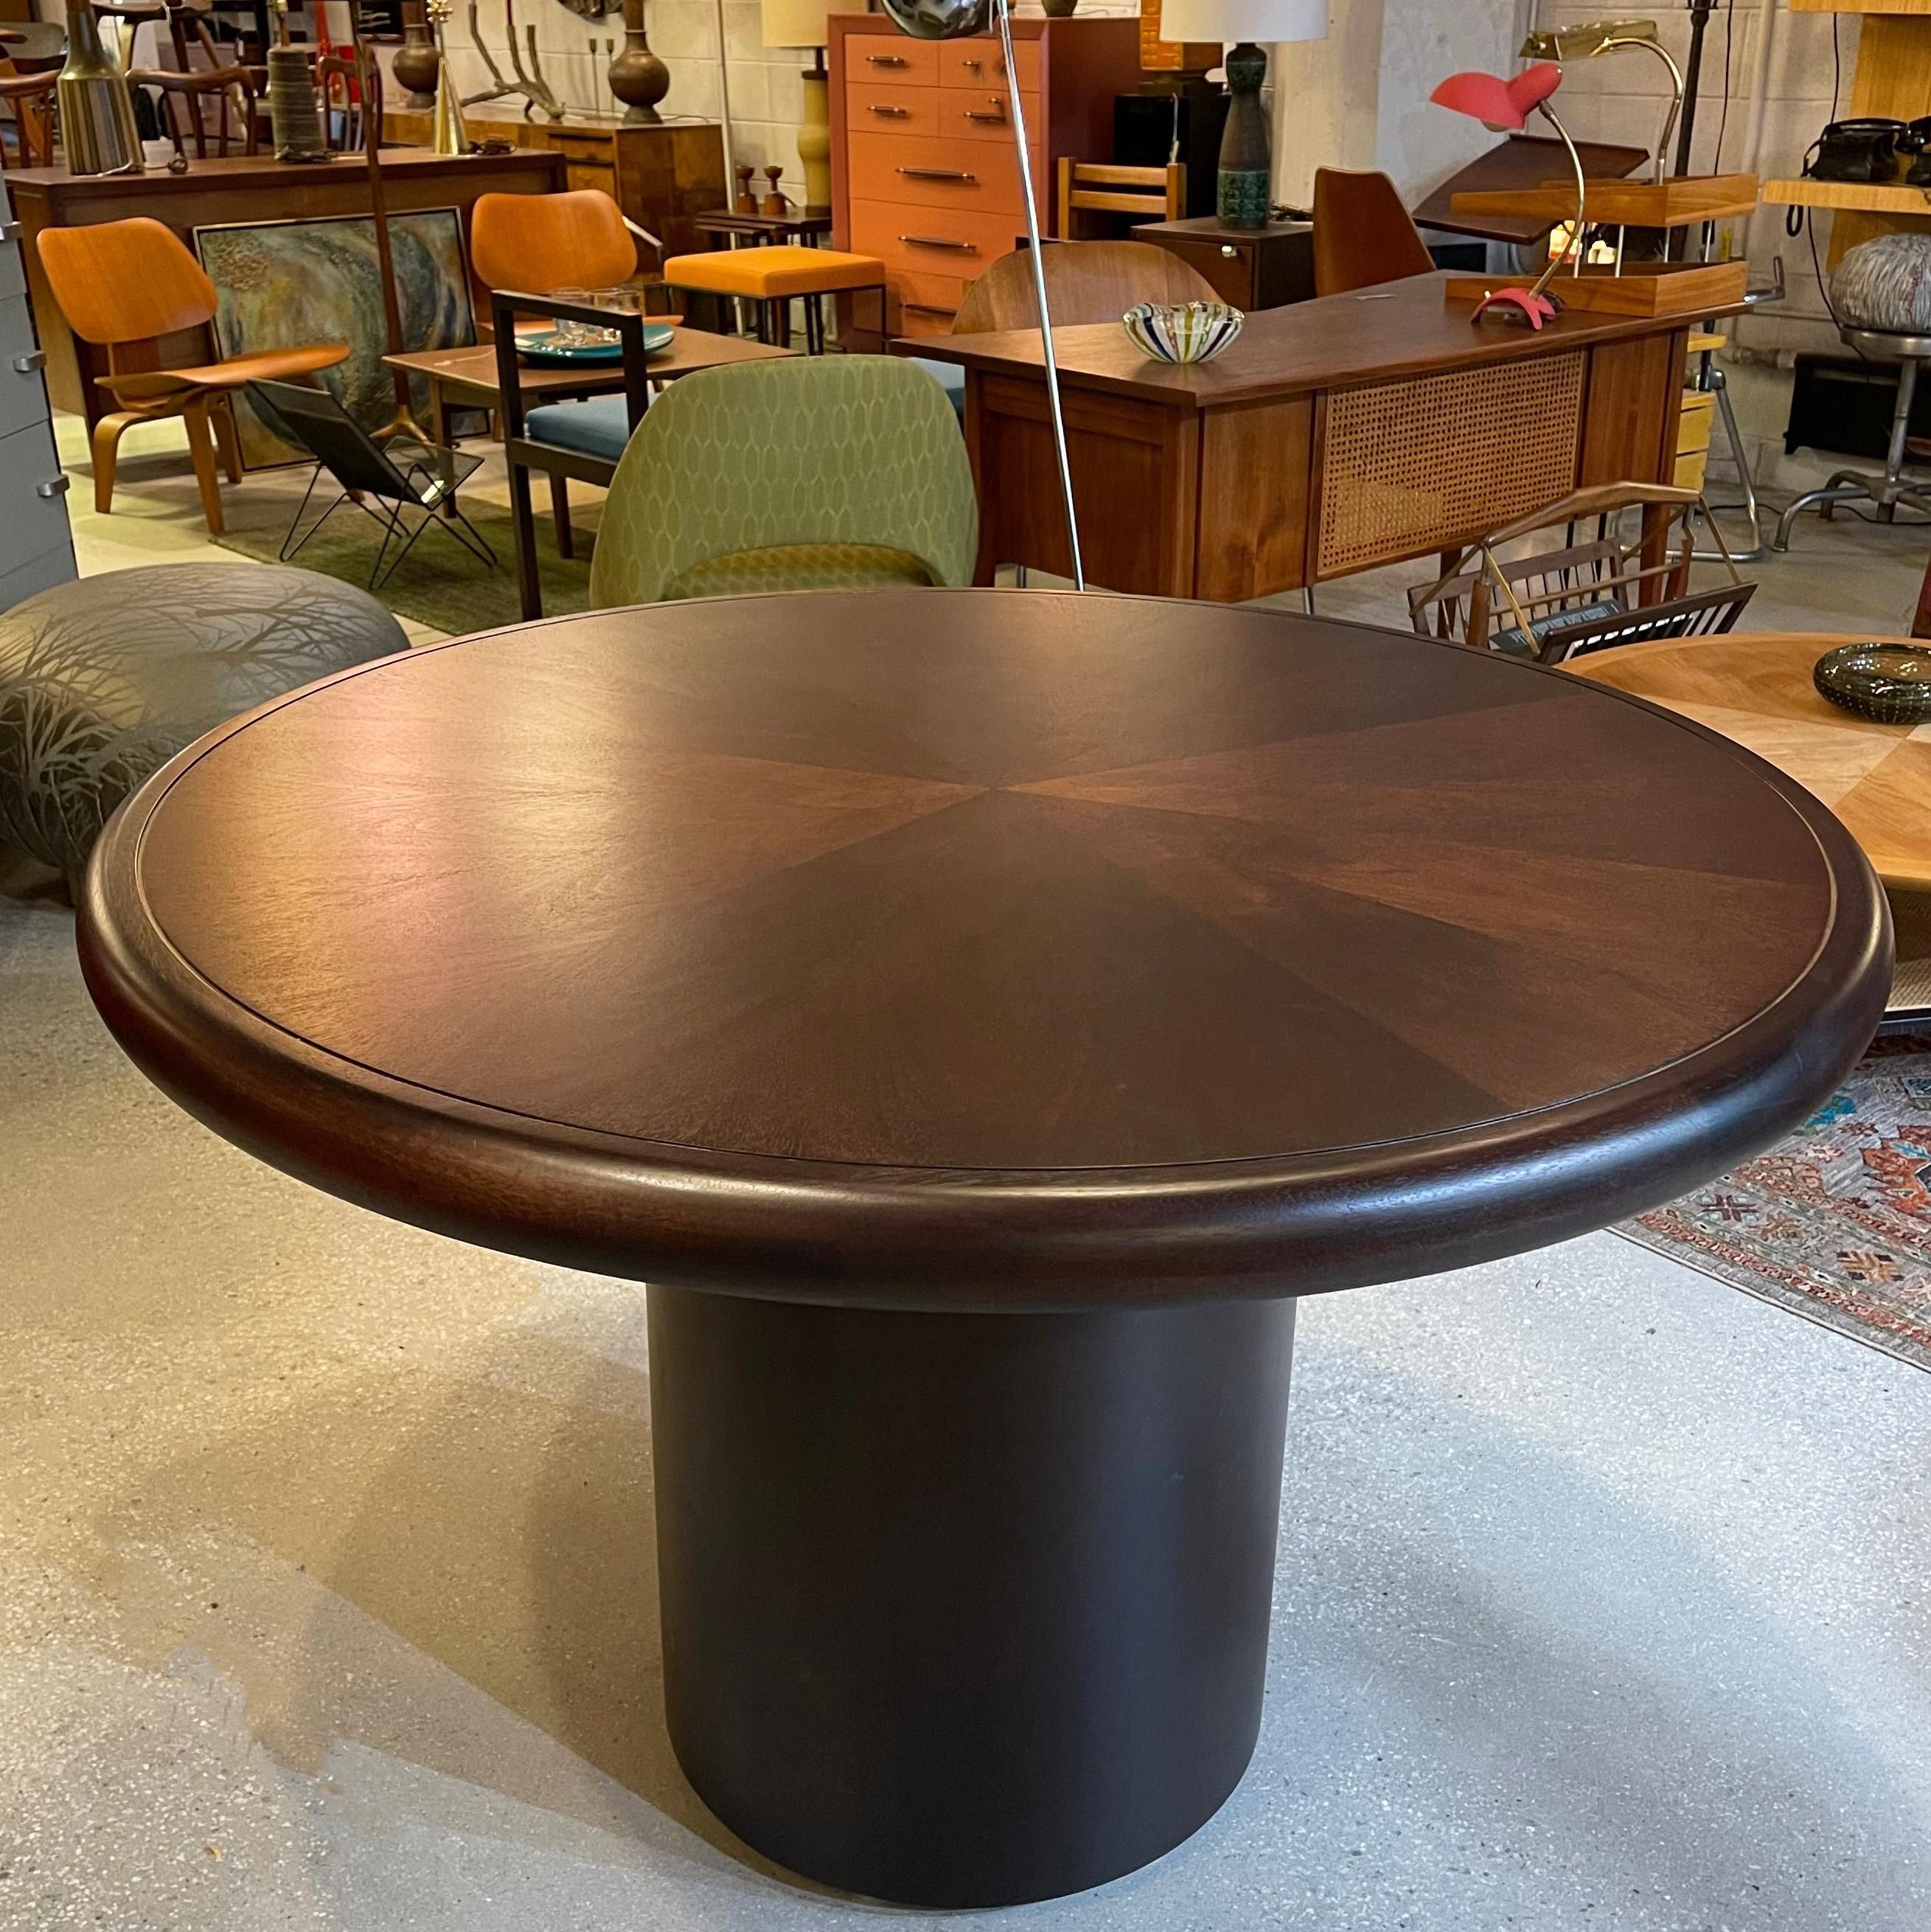 Exceptional, round, rosewood dining table by Edward Wormley for Dunbar features a 2.5 inch thick, bookmatched starburst pattern top with bullnose edge atop a substantial pedestal base. An inset brass band runs an inch inside the diameter of the